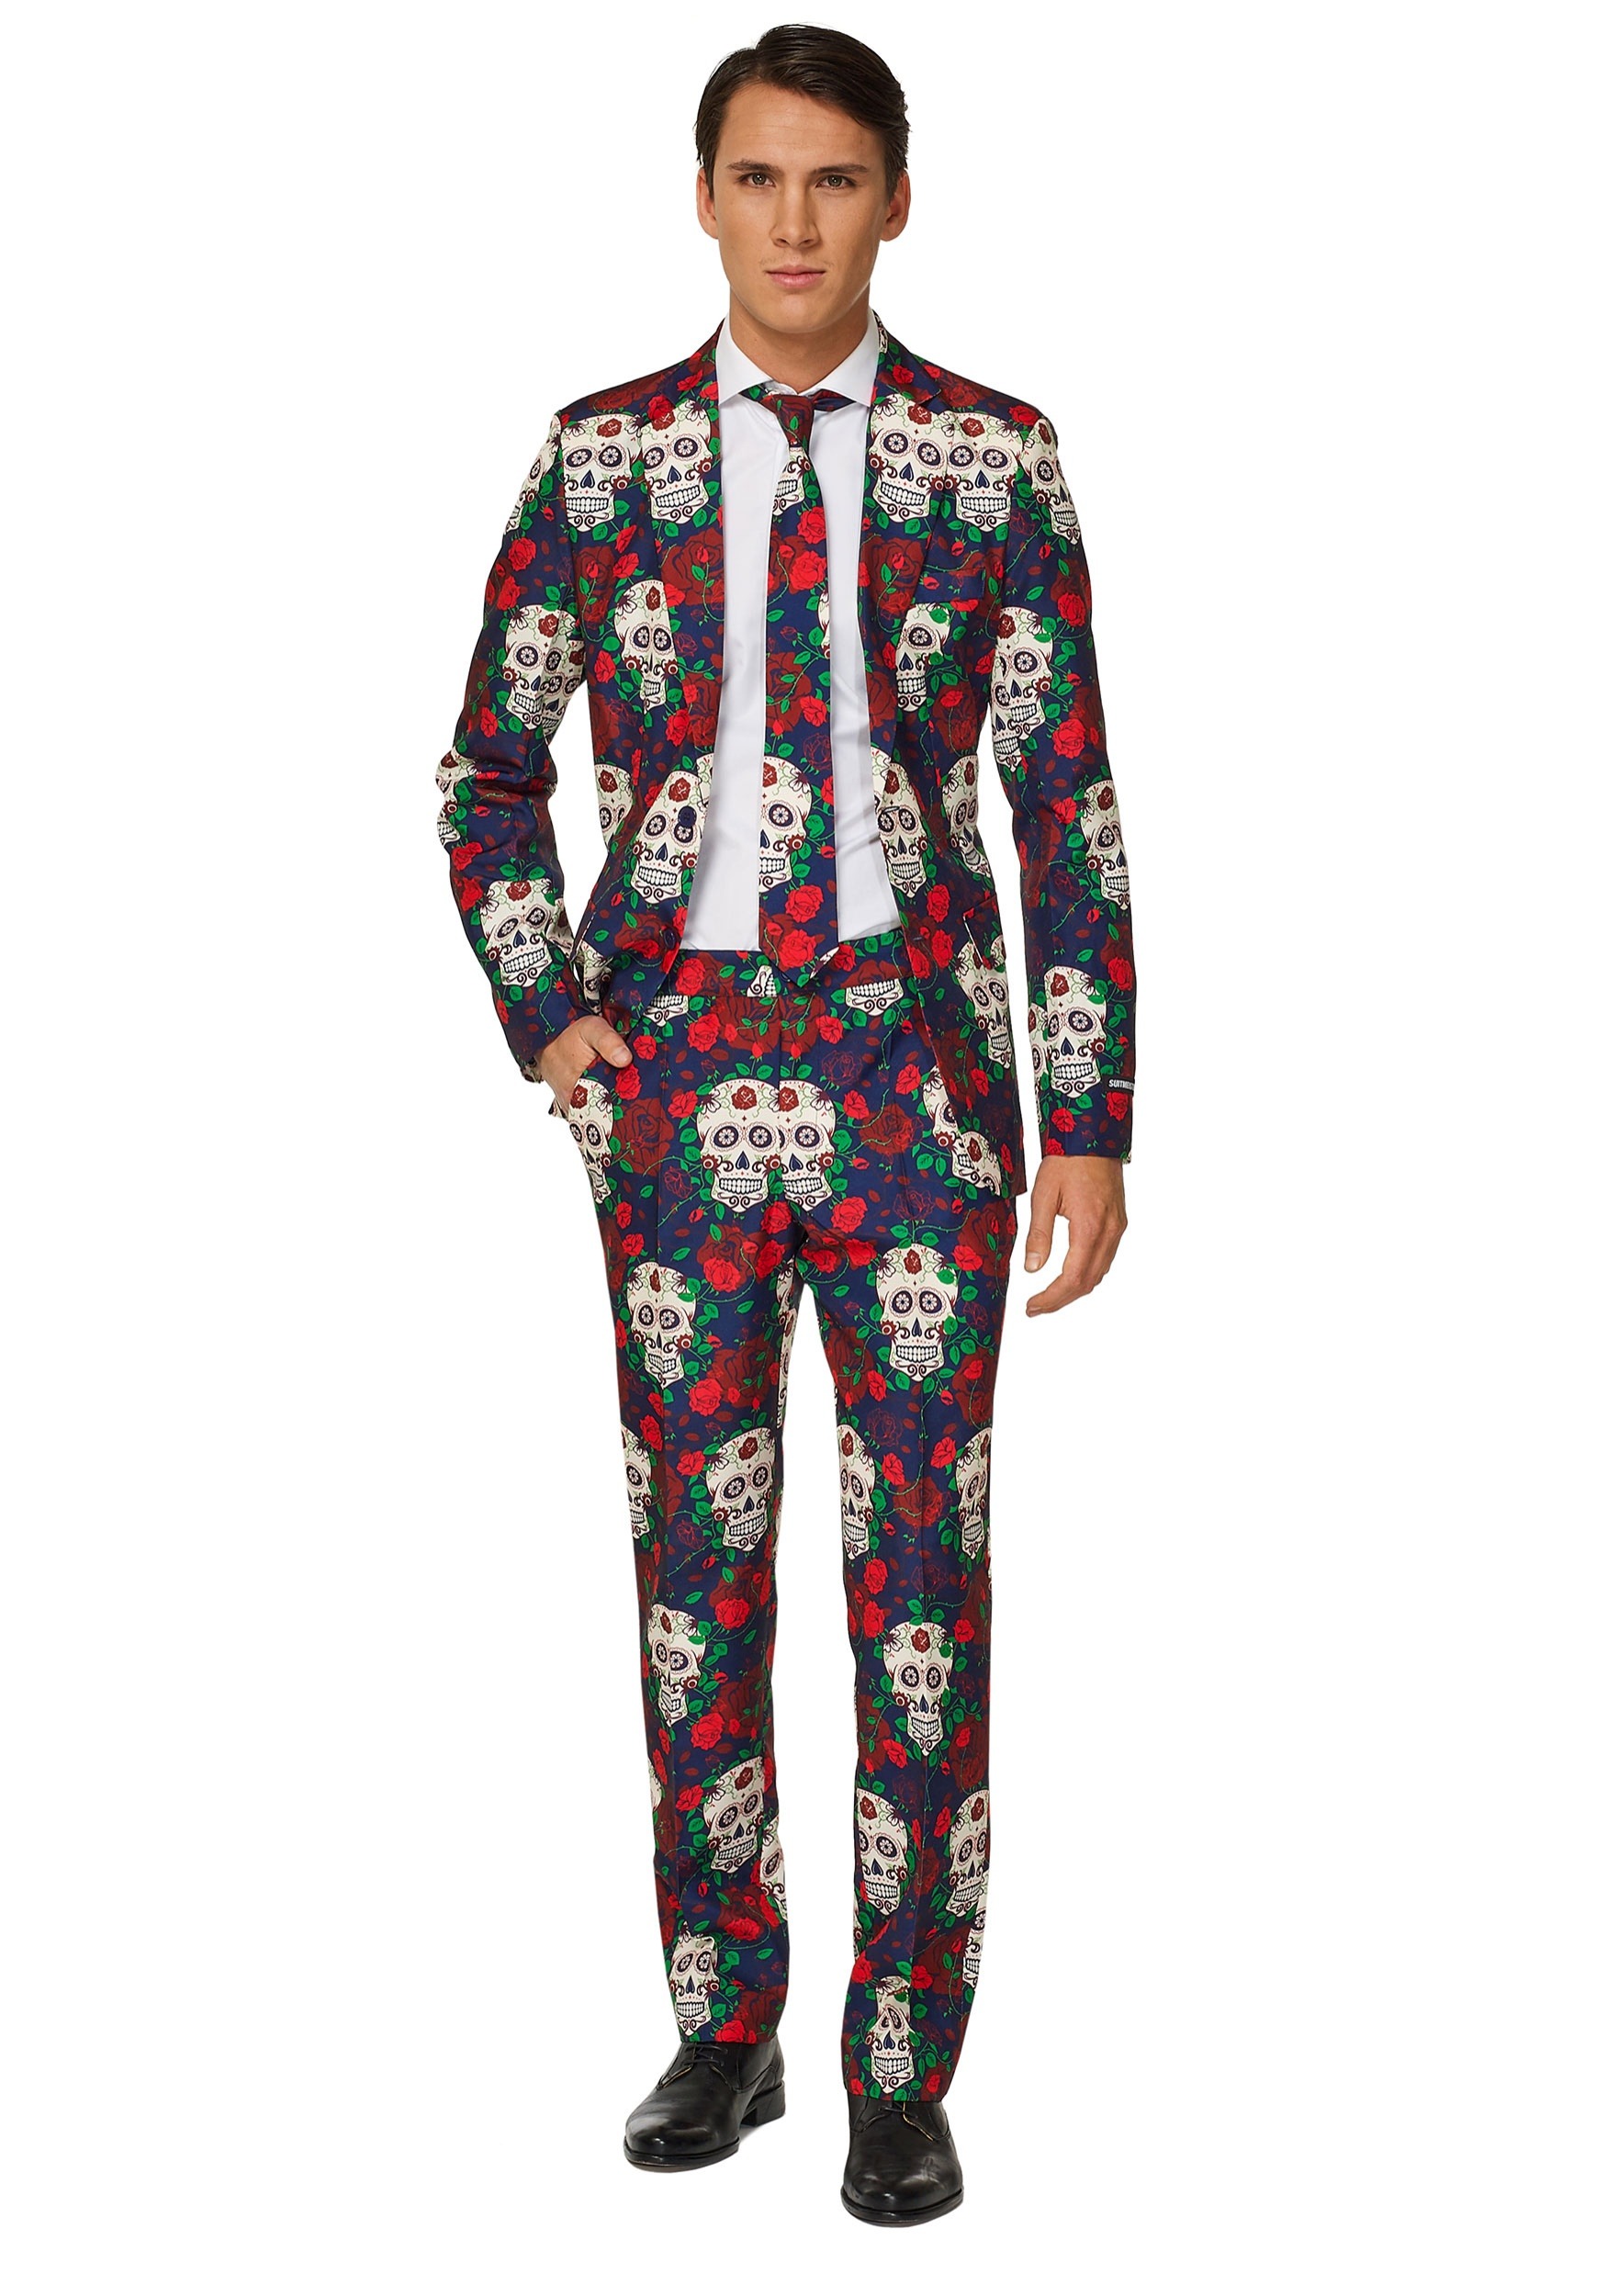 Image of Day of the Dead Men's Suitmeister Suit Costume ID OSOBAS0042-XL